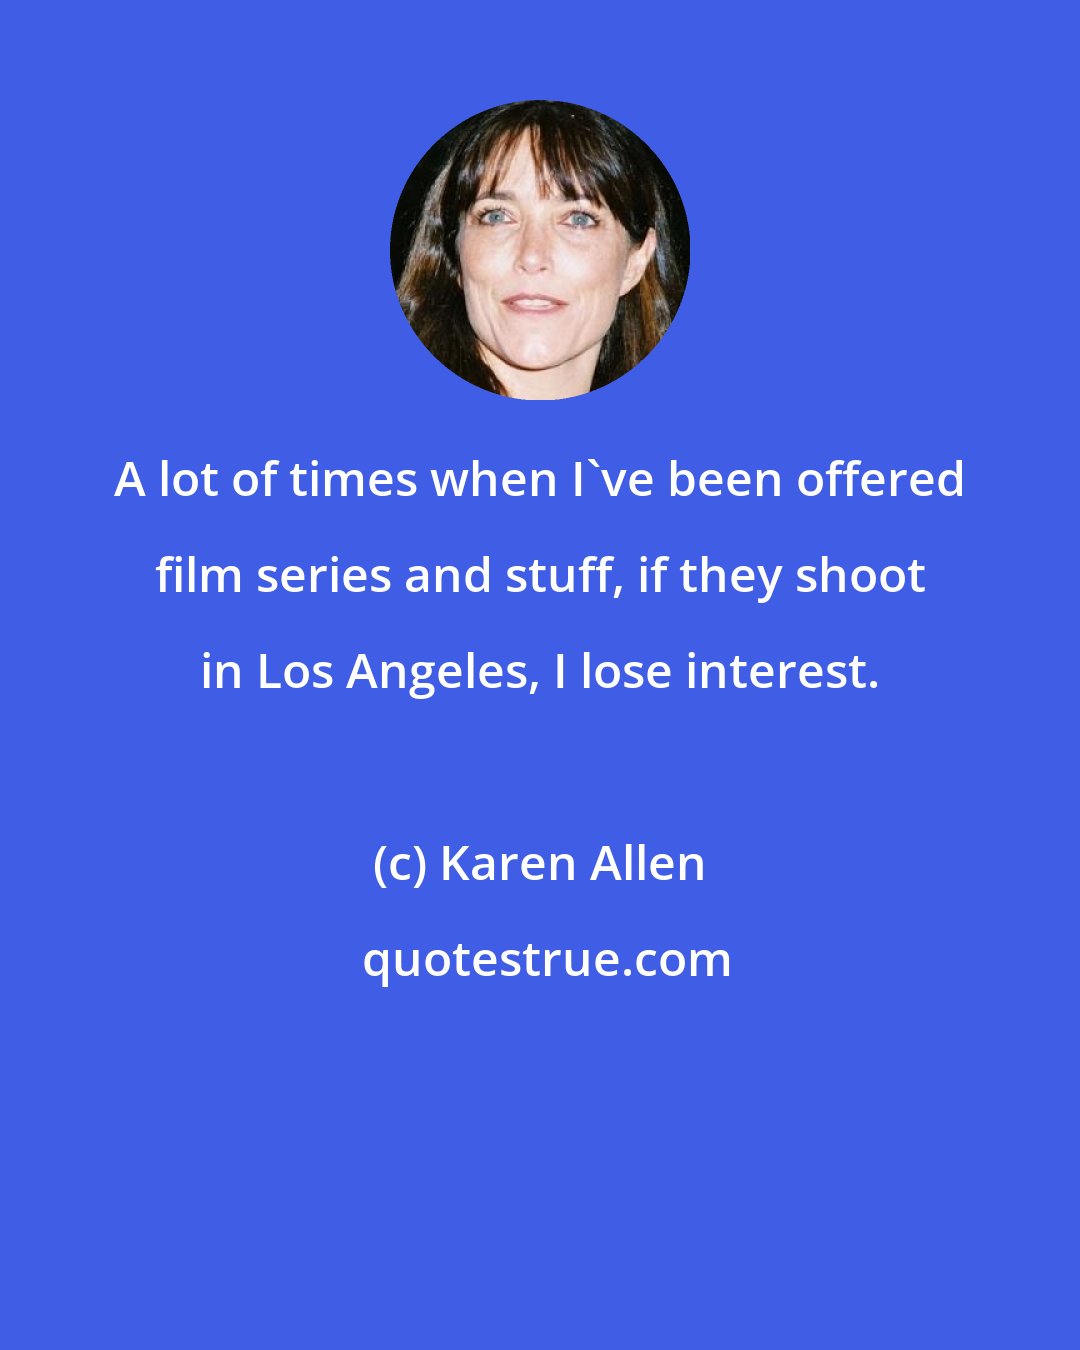 Karen Allen: A lot of times when I've been offered film series and stuff, if they shoot in Los Angeles, I lose interest.